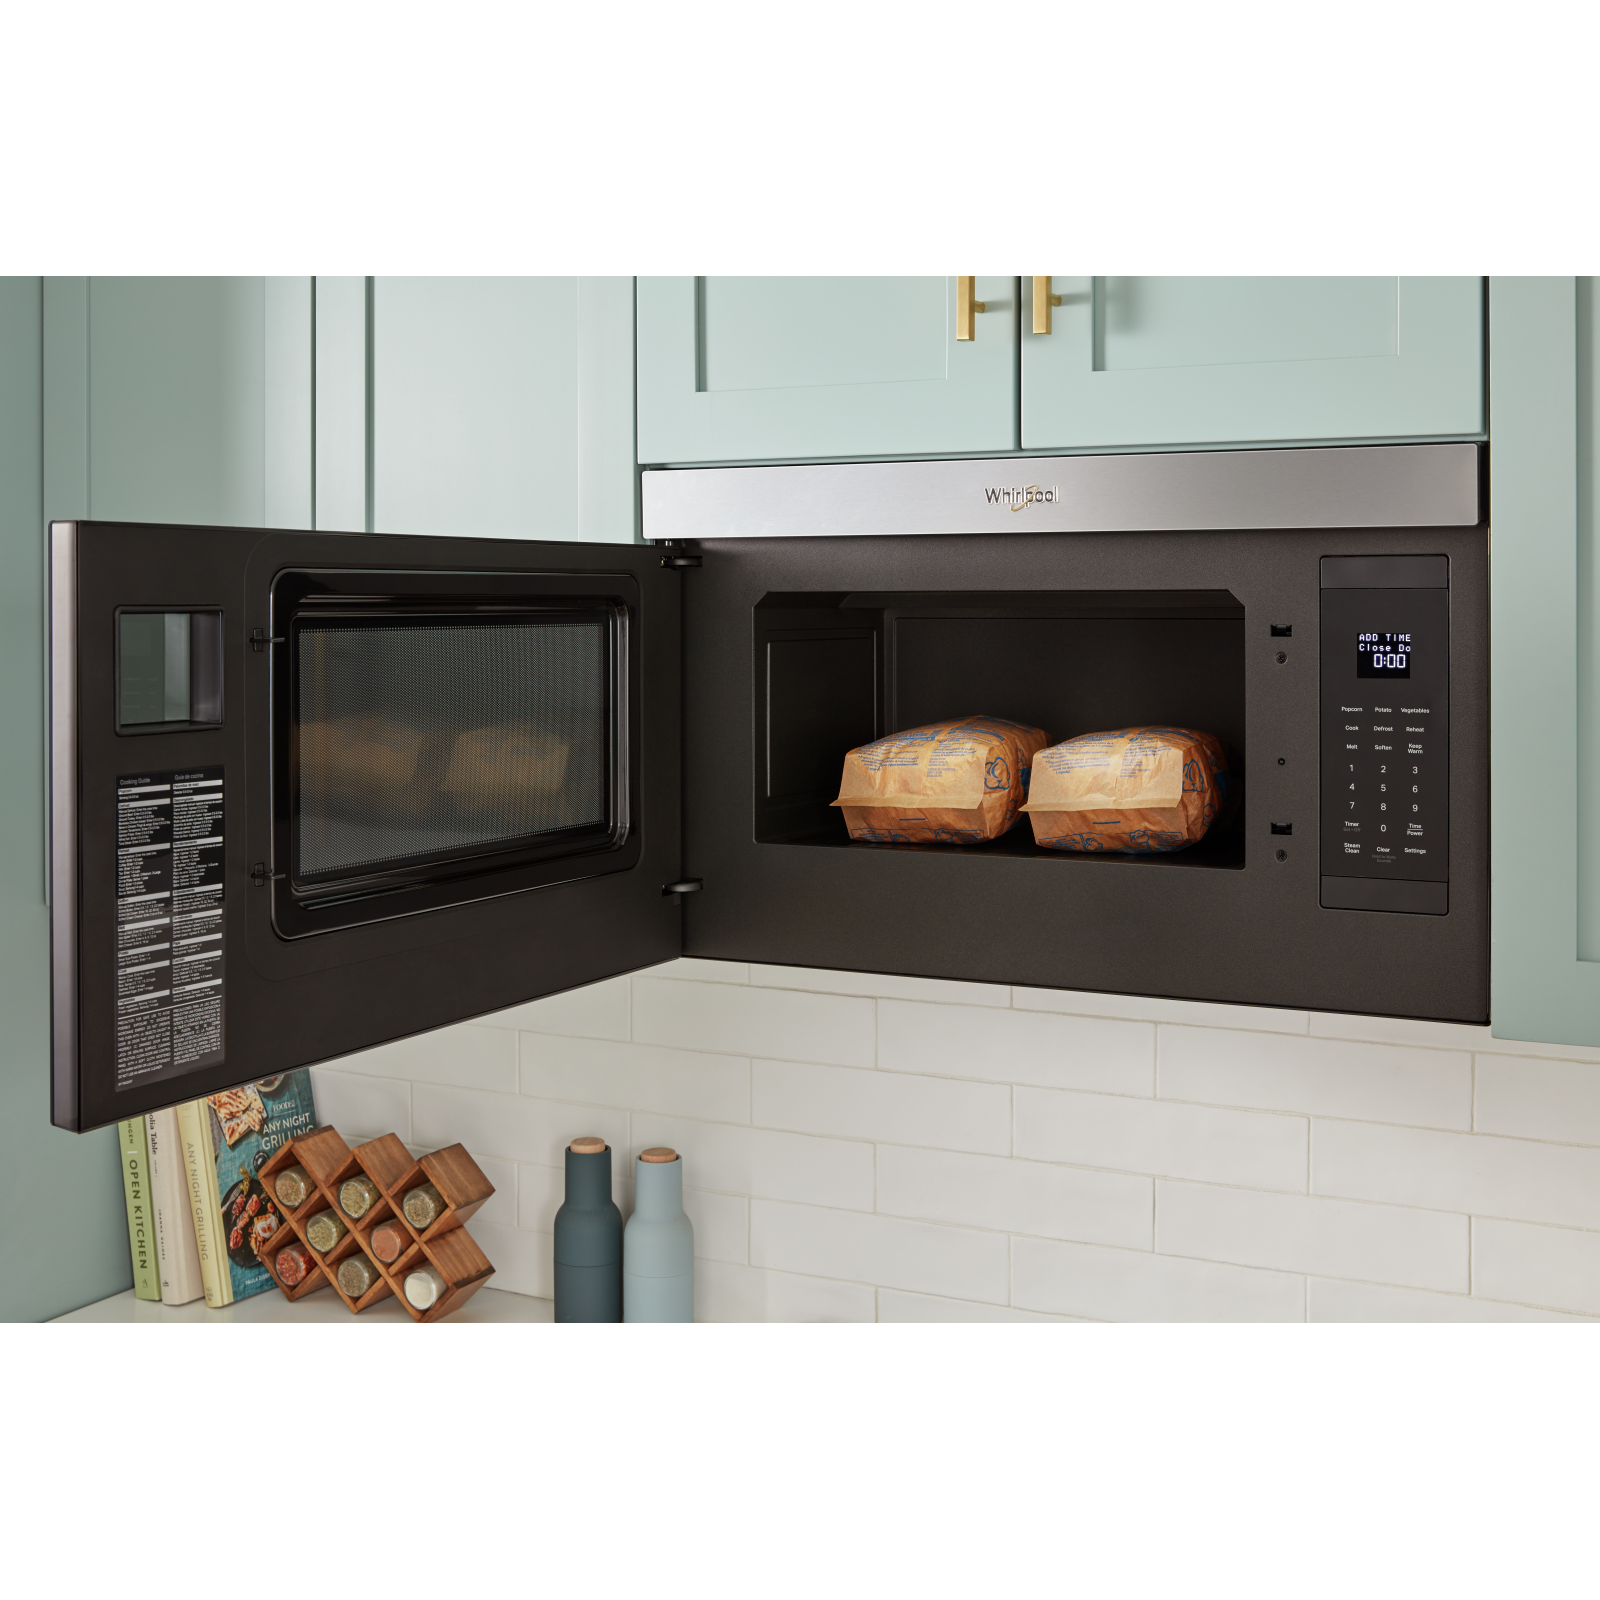 Whirlpool - 1.1 cu. Ft  Over the range Microwave in Stainless - YWMMF5930PZ